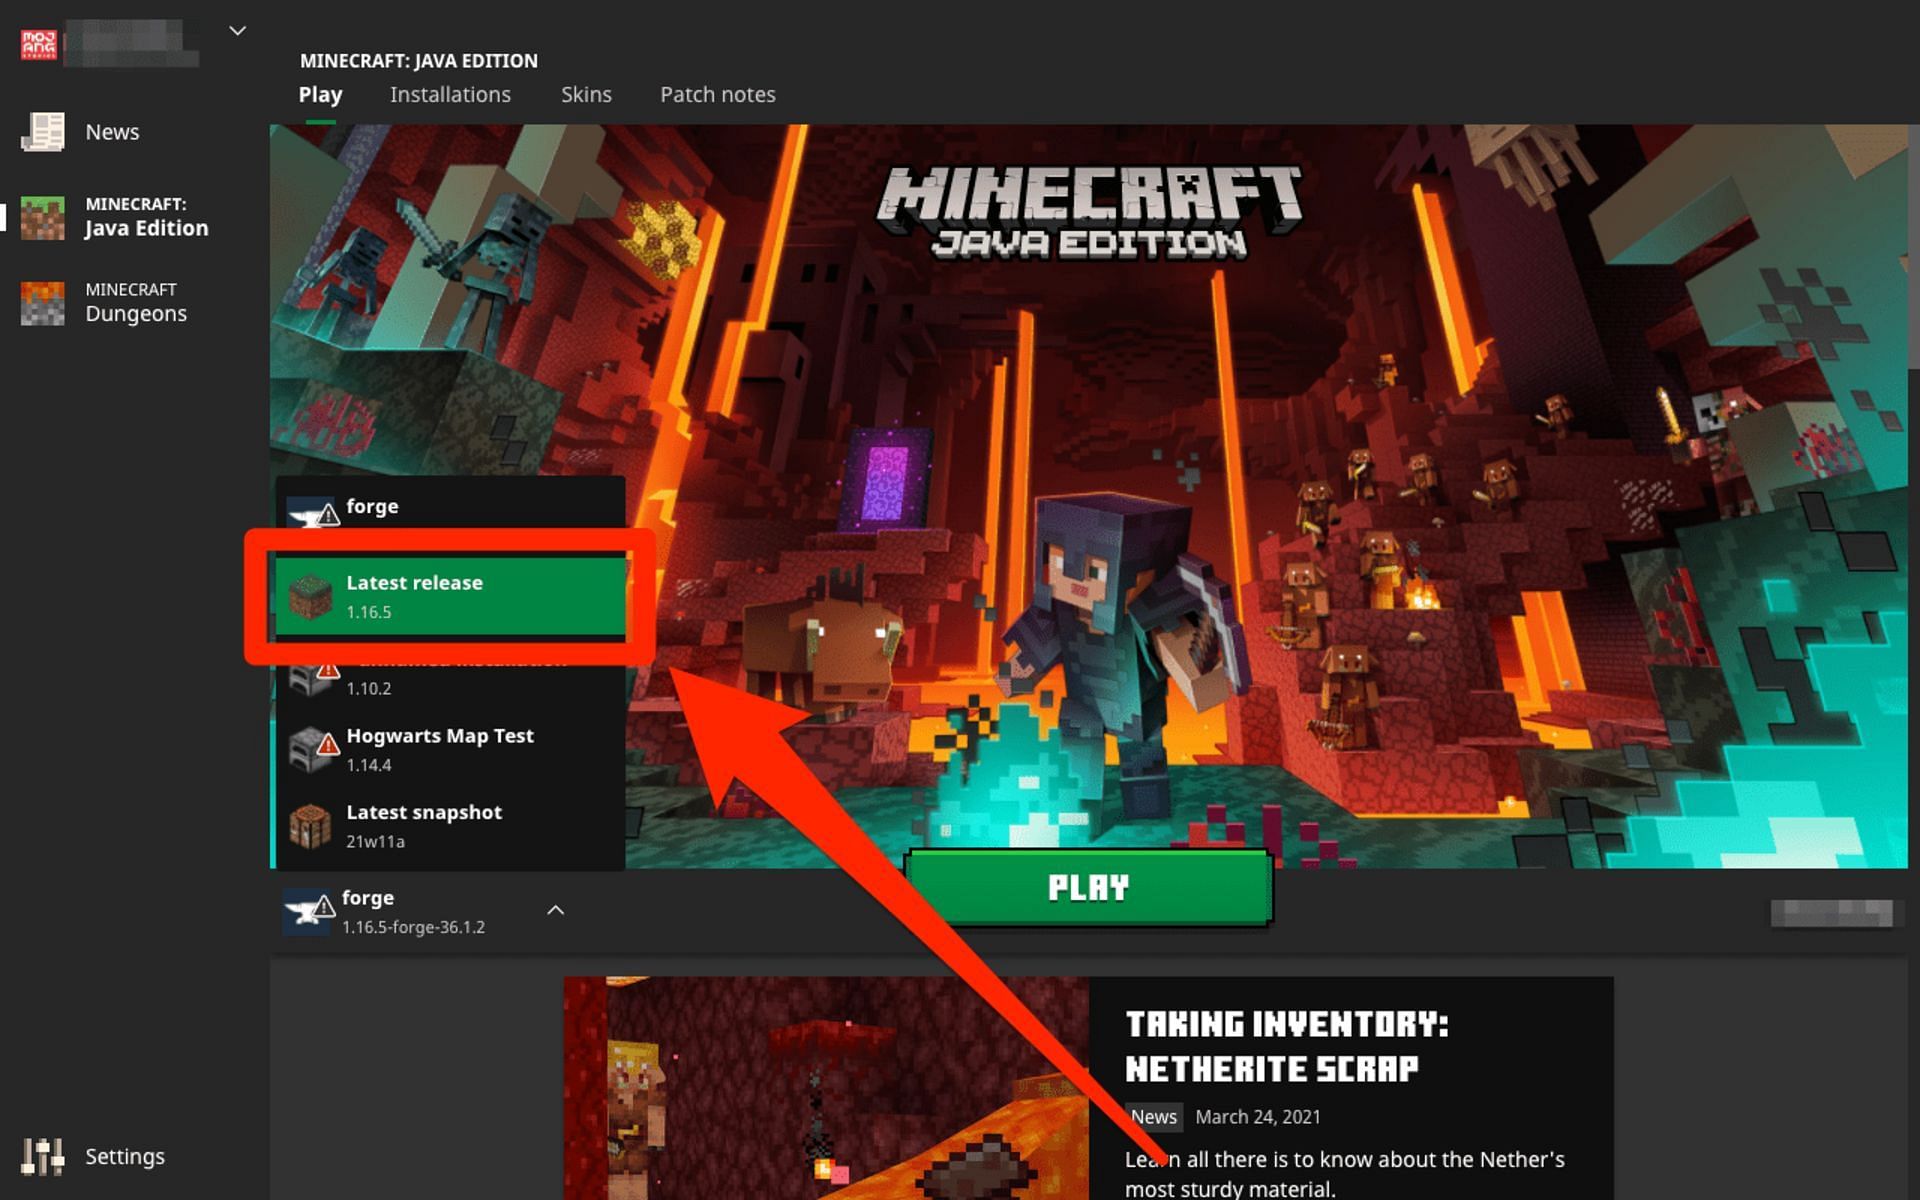 There are various ways to update Minecraft, including the new Minecraft launcher (Image via Mojang)